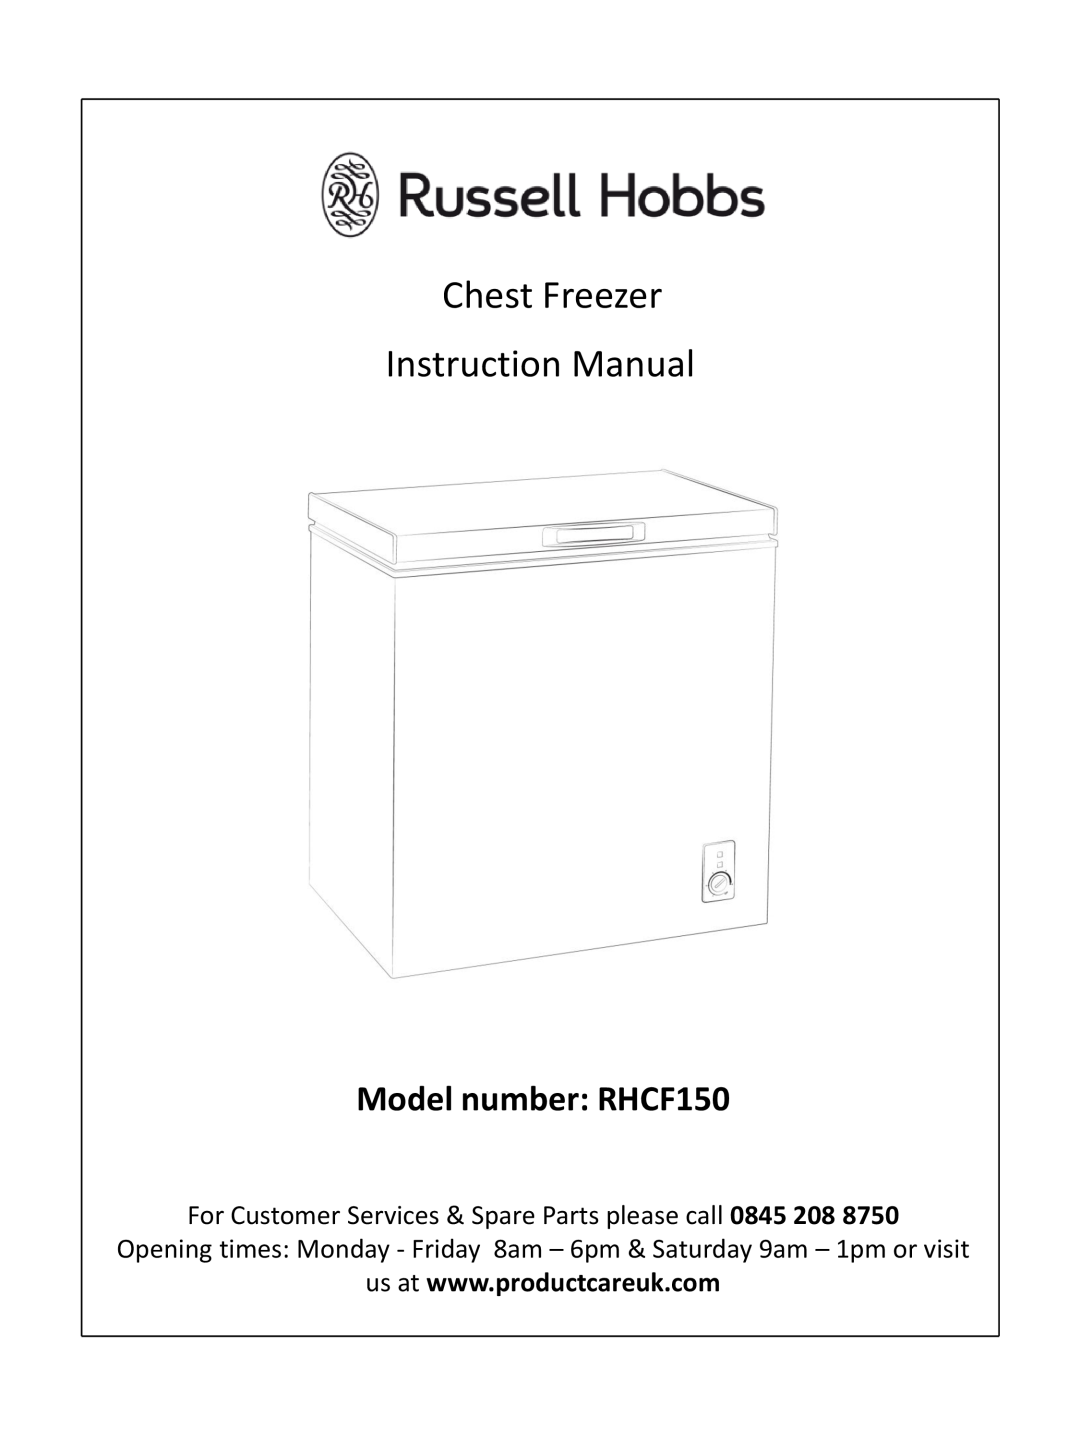 Russell Hobbs instruction manual Model number RHCF150 